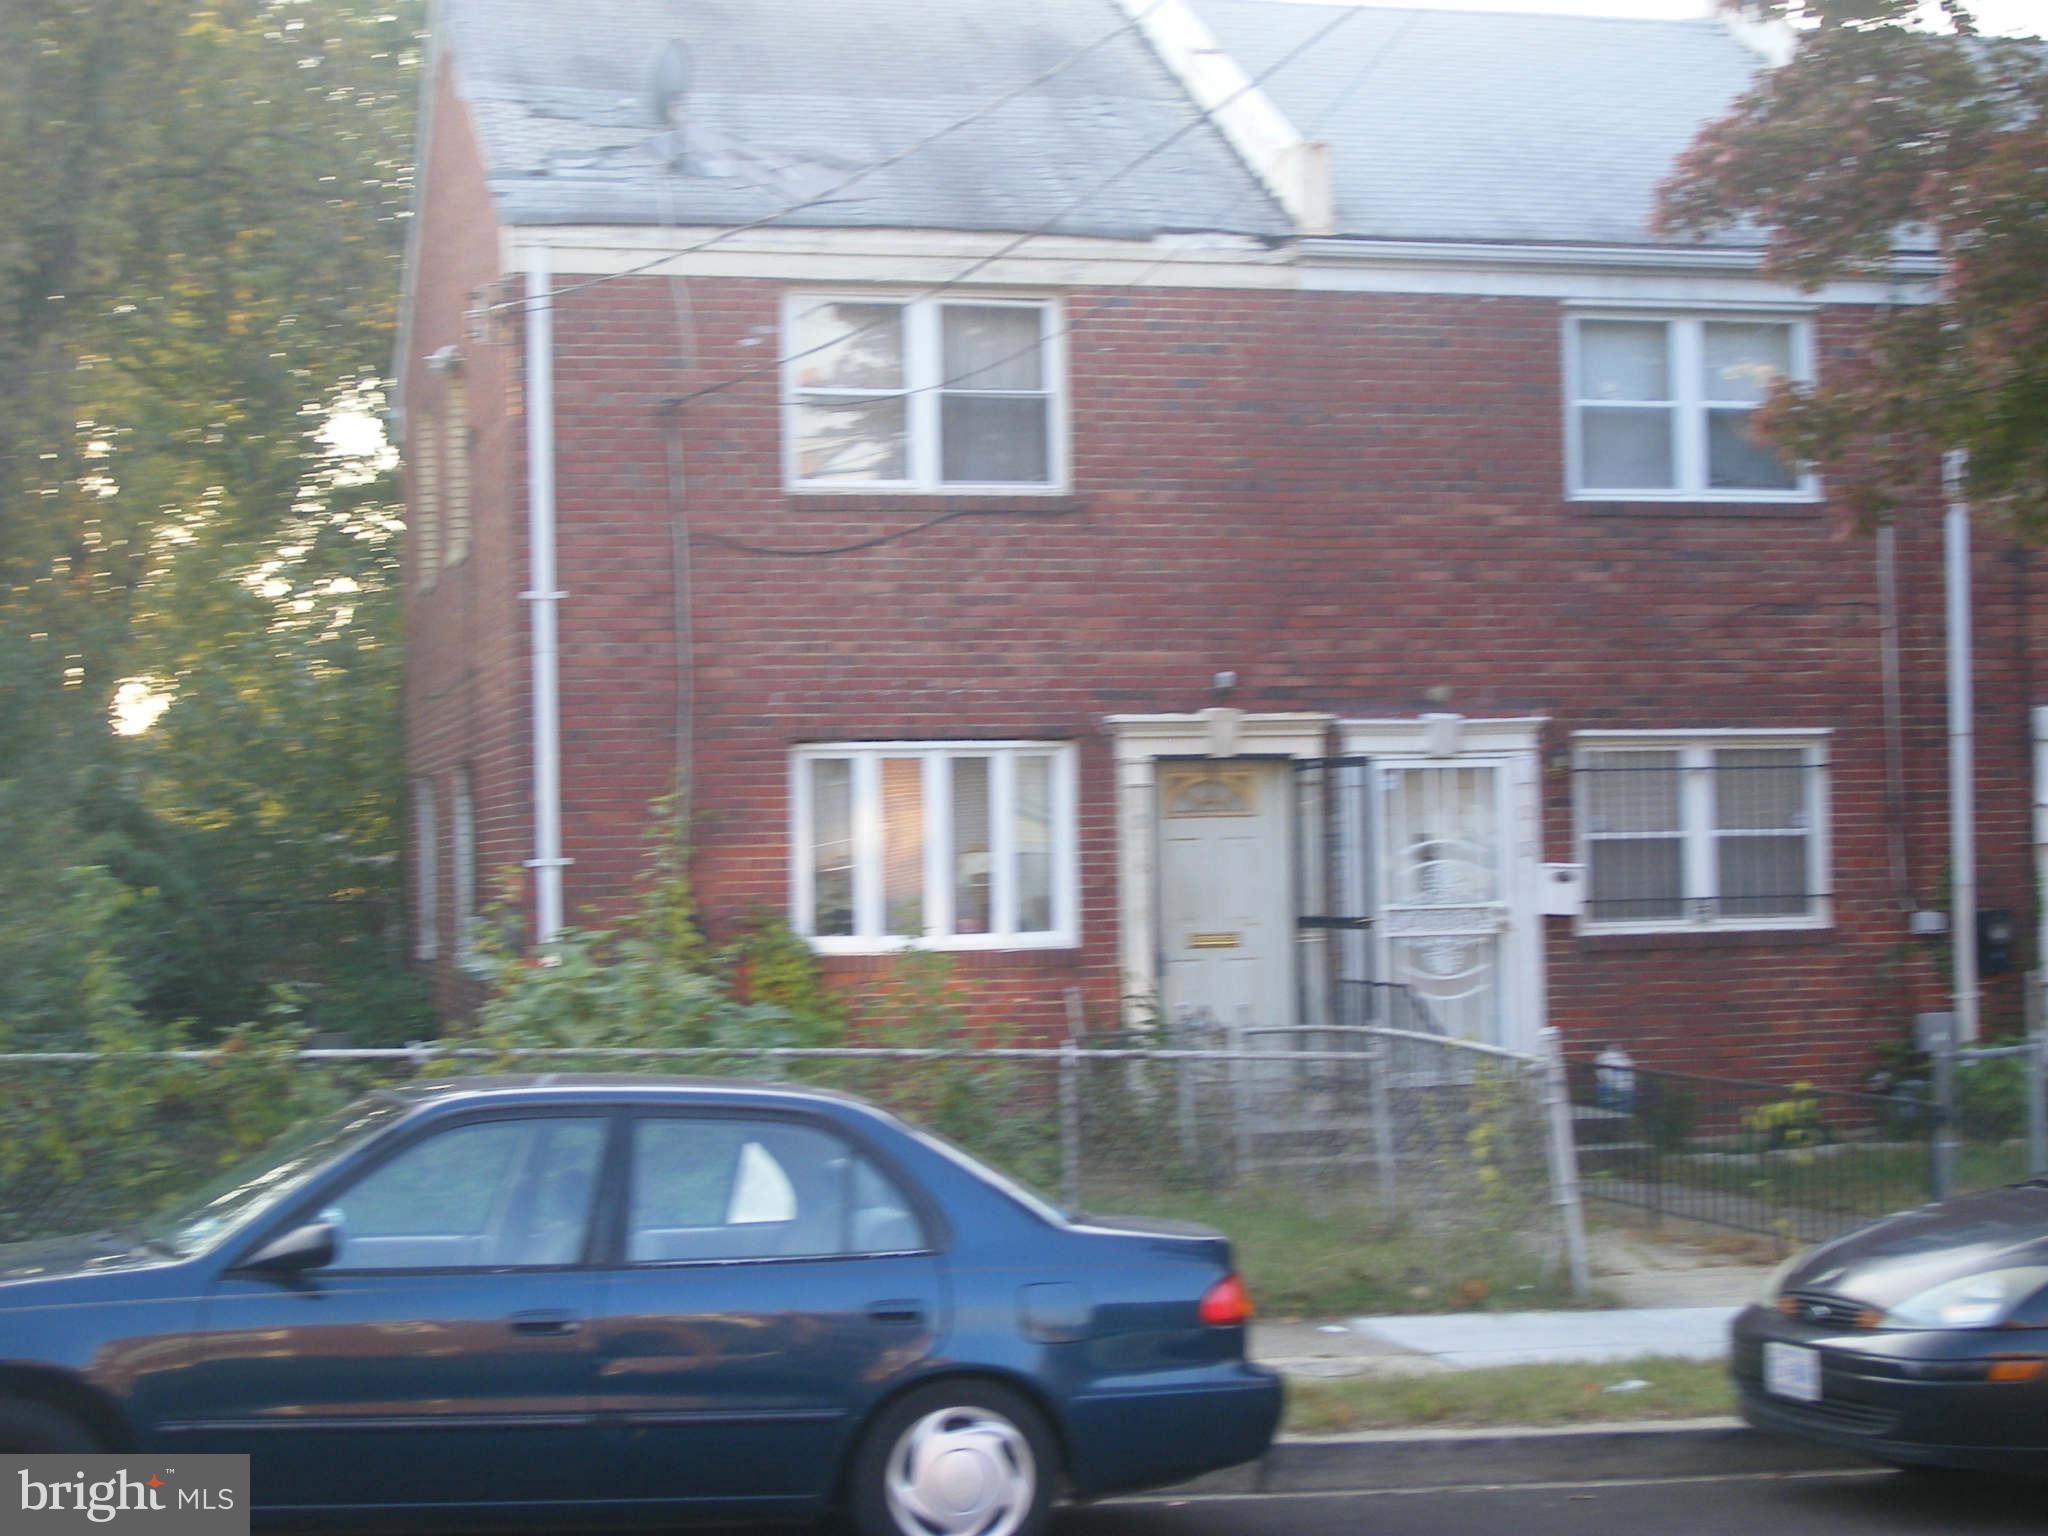 a front view of a house with car parked